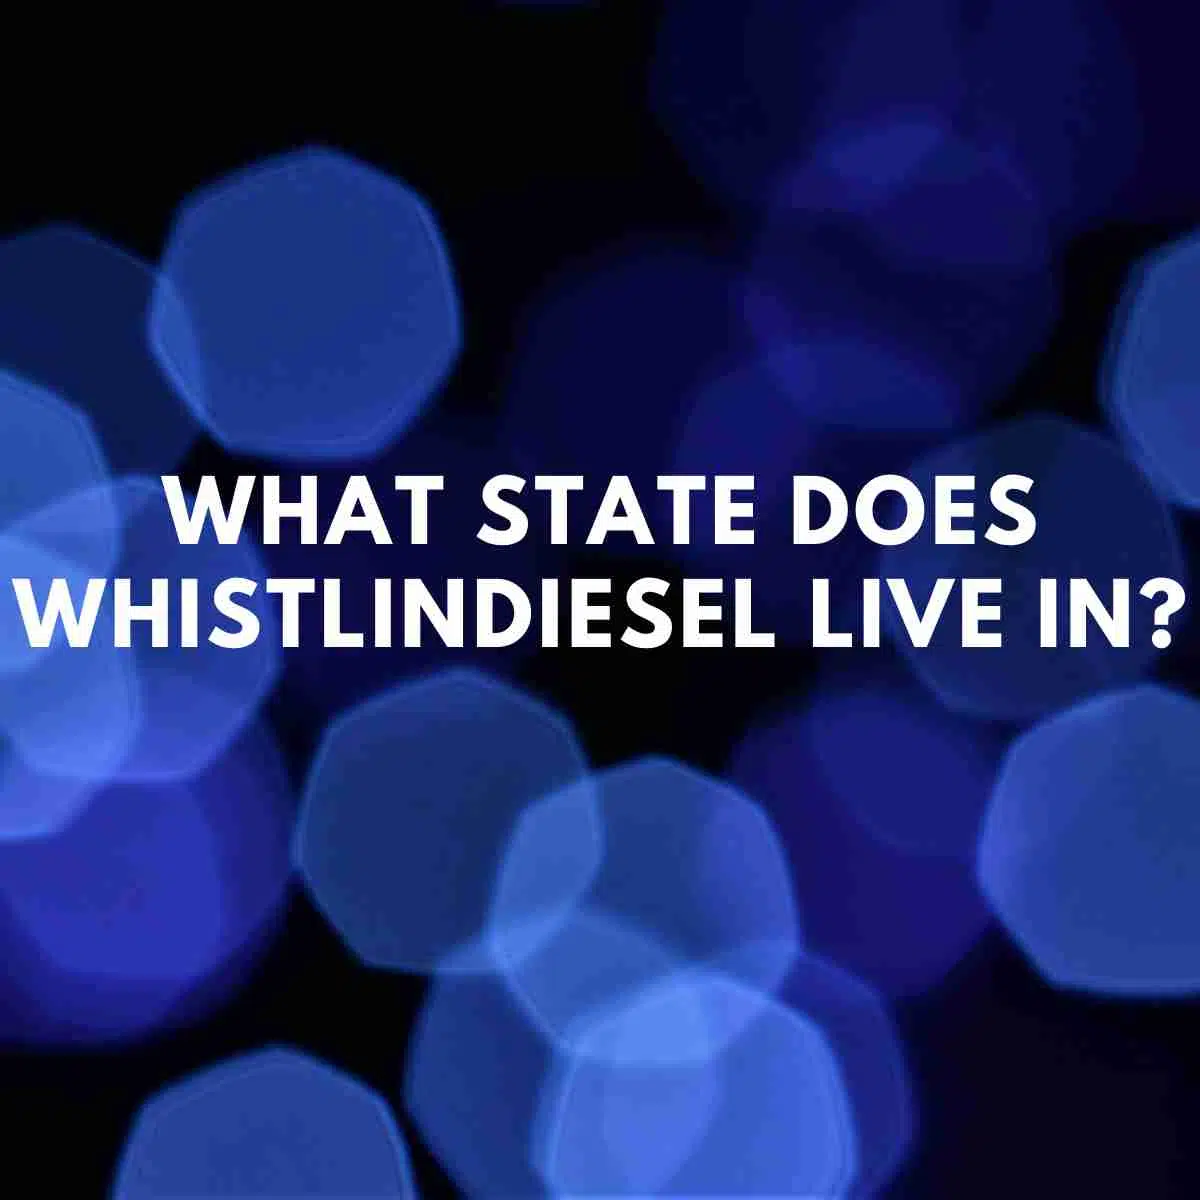 What state does WhistlinDiesel live in